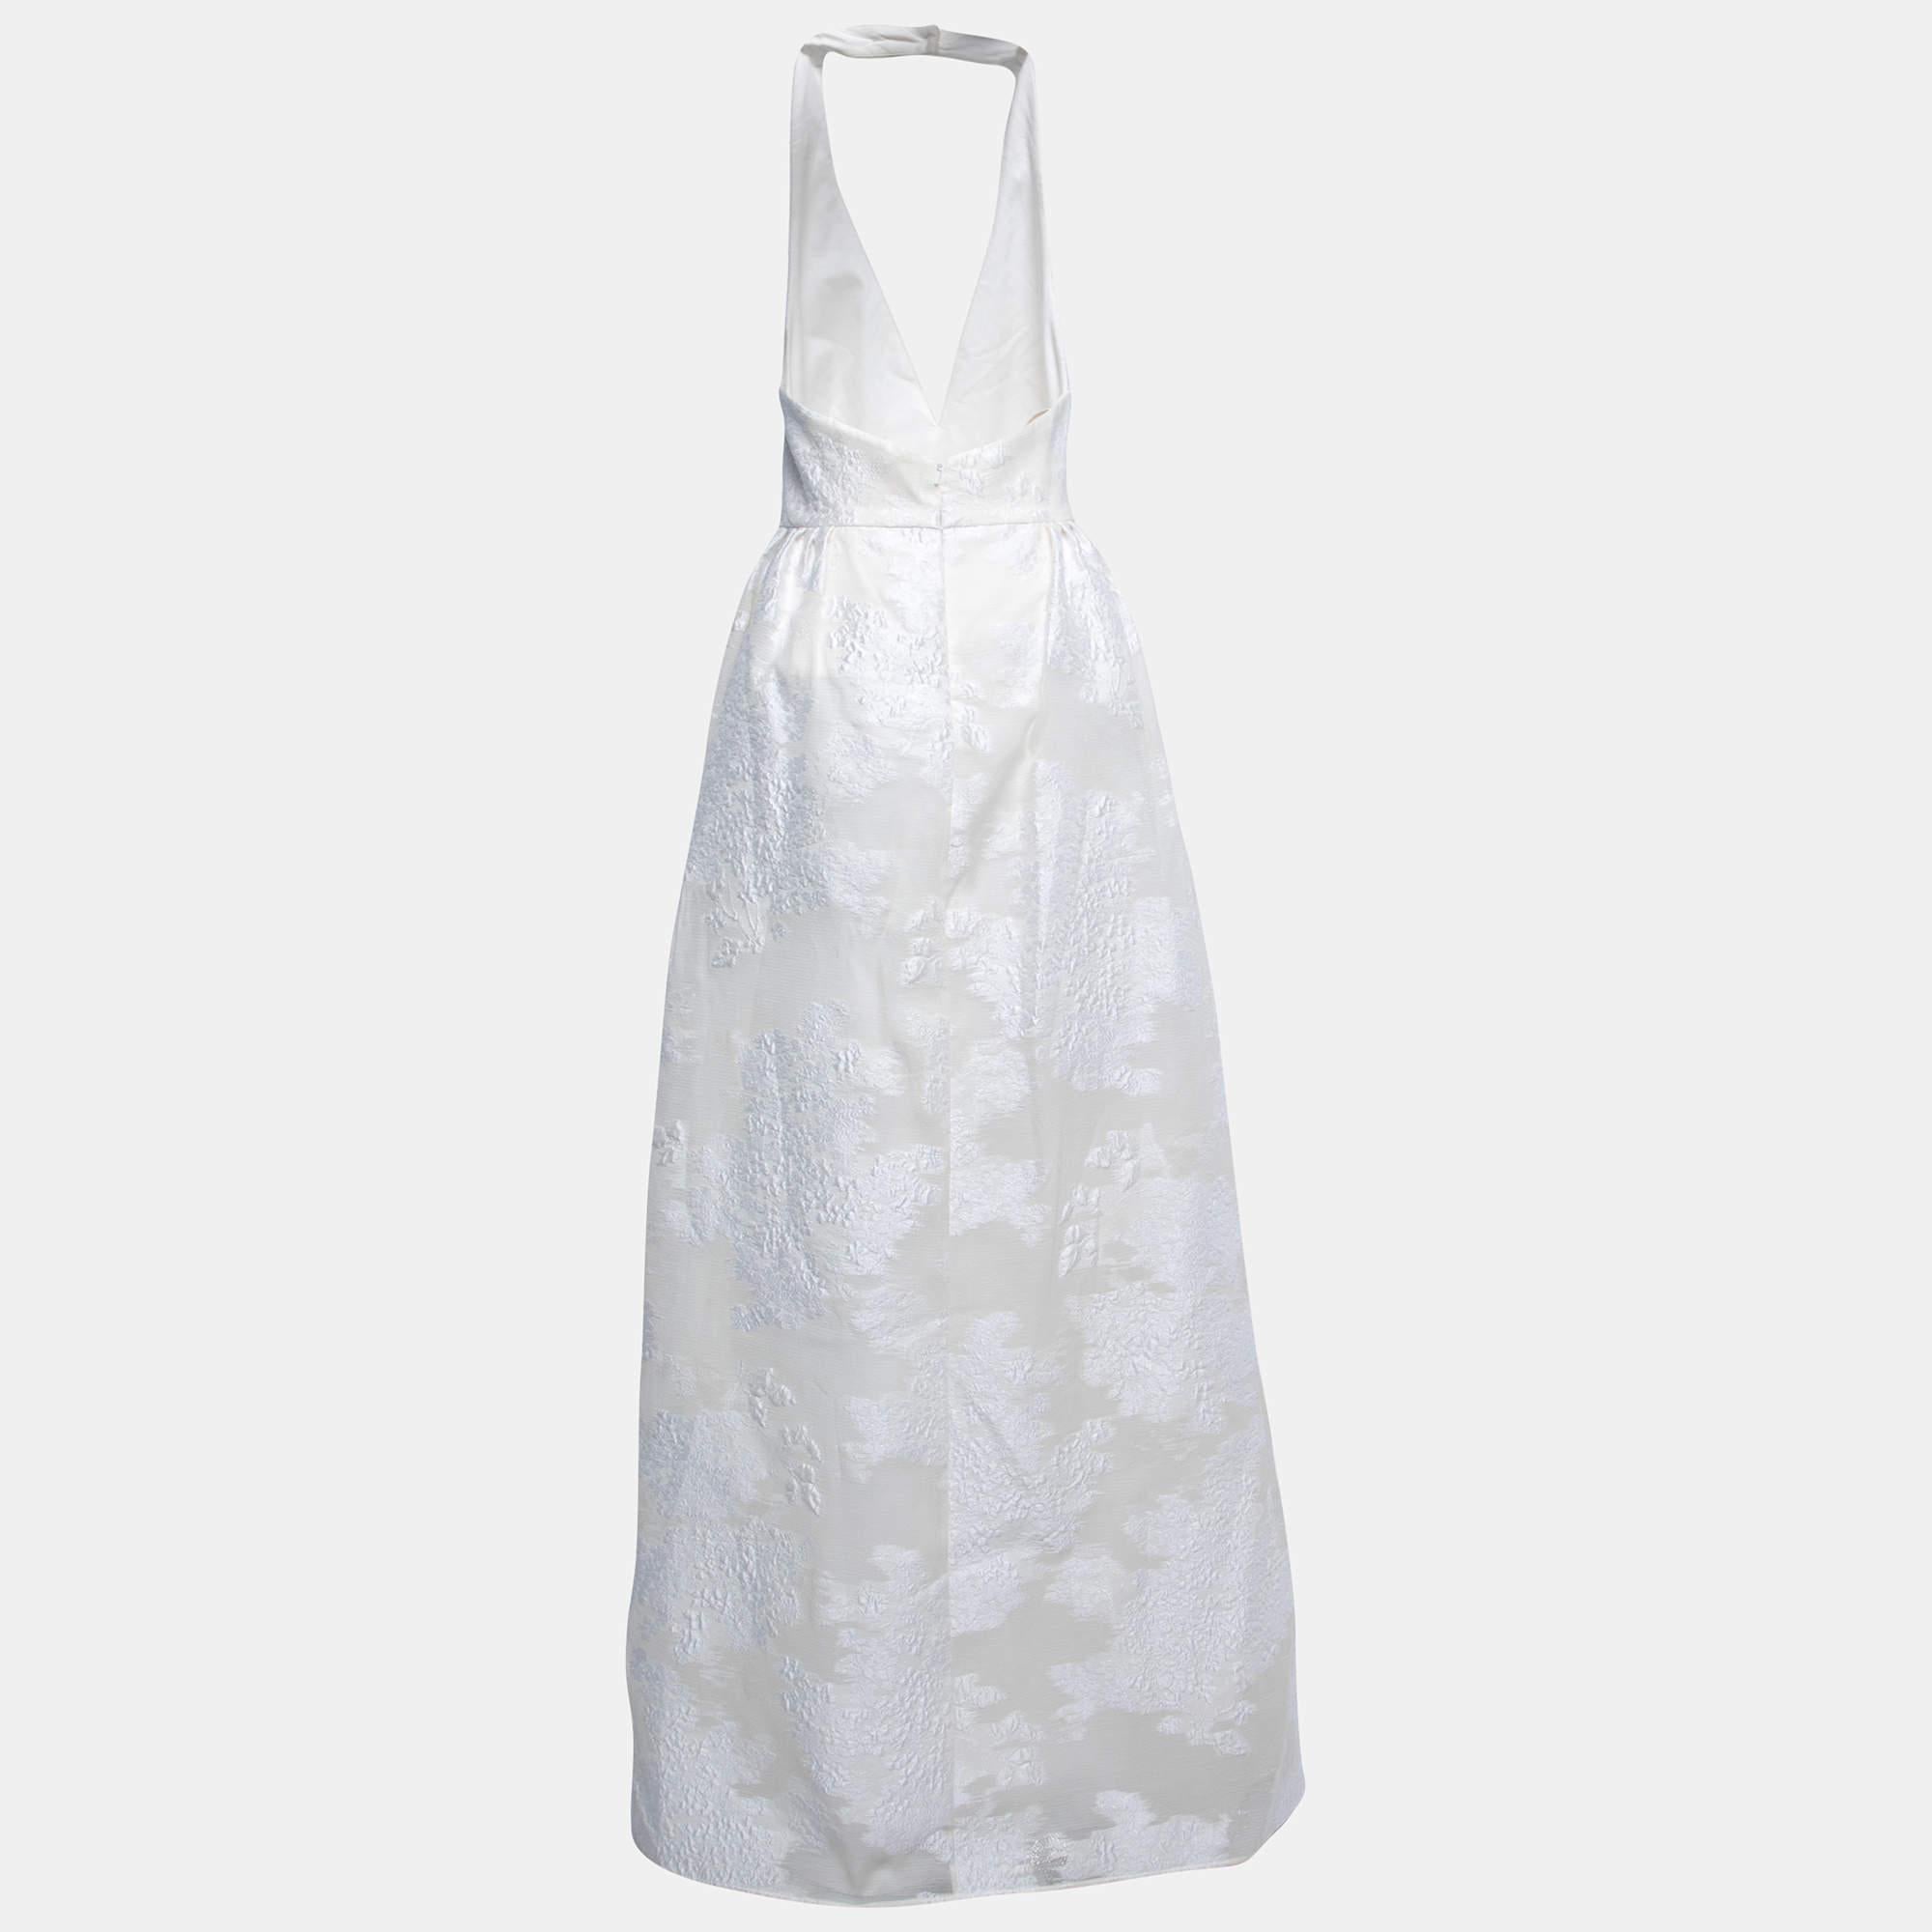 The Max Mara Ermione wedding dress is an exquisite choice for the modern bride. Crafted with meticulous attention to detail, this stunning dress features a halter neck silhouette and a shimmering white lurex jacquard fabric that adds a touch of